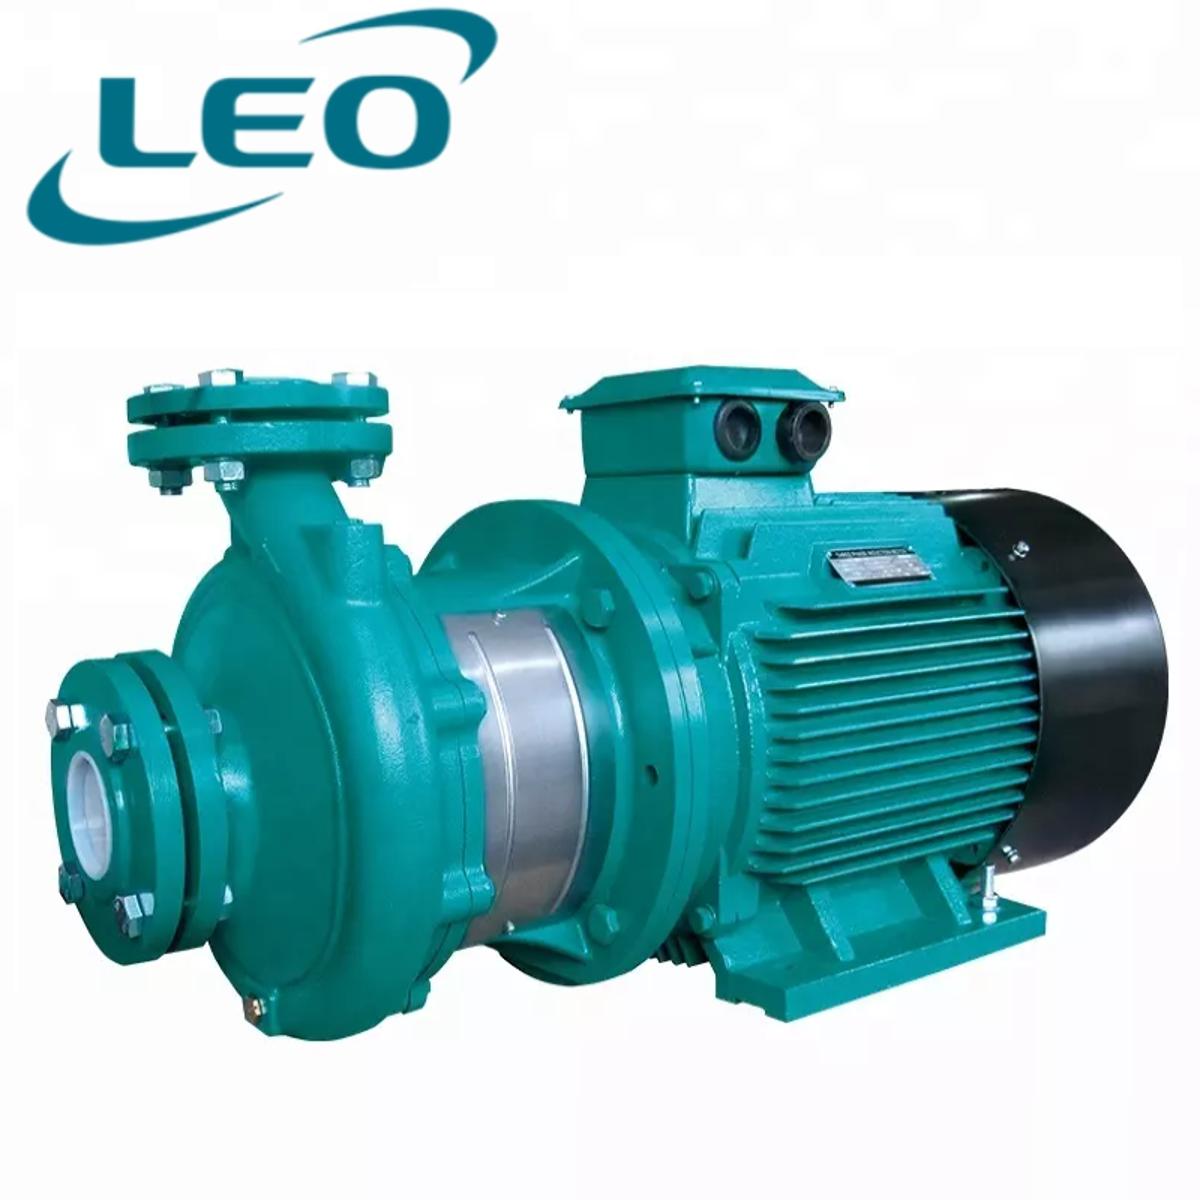 LEO - XST-80-160-110 - 11000 W - 15 HP - Clean Water HEAVY DUTY Centrifugal Pump With FLANGES  - 380V~400V THREE PHASE - SIZE :- 4" x 3" - European STANDARD